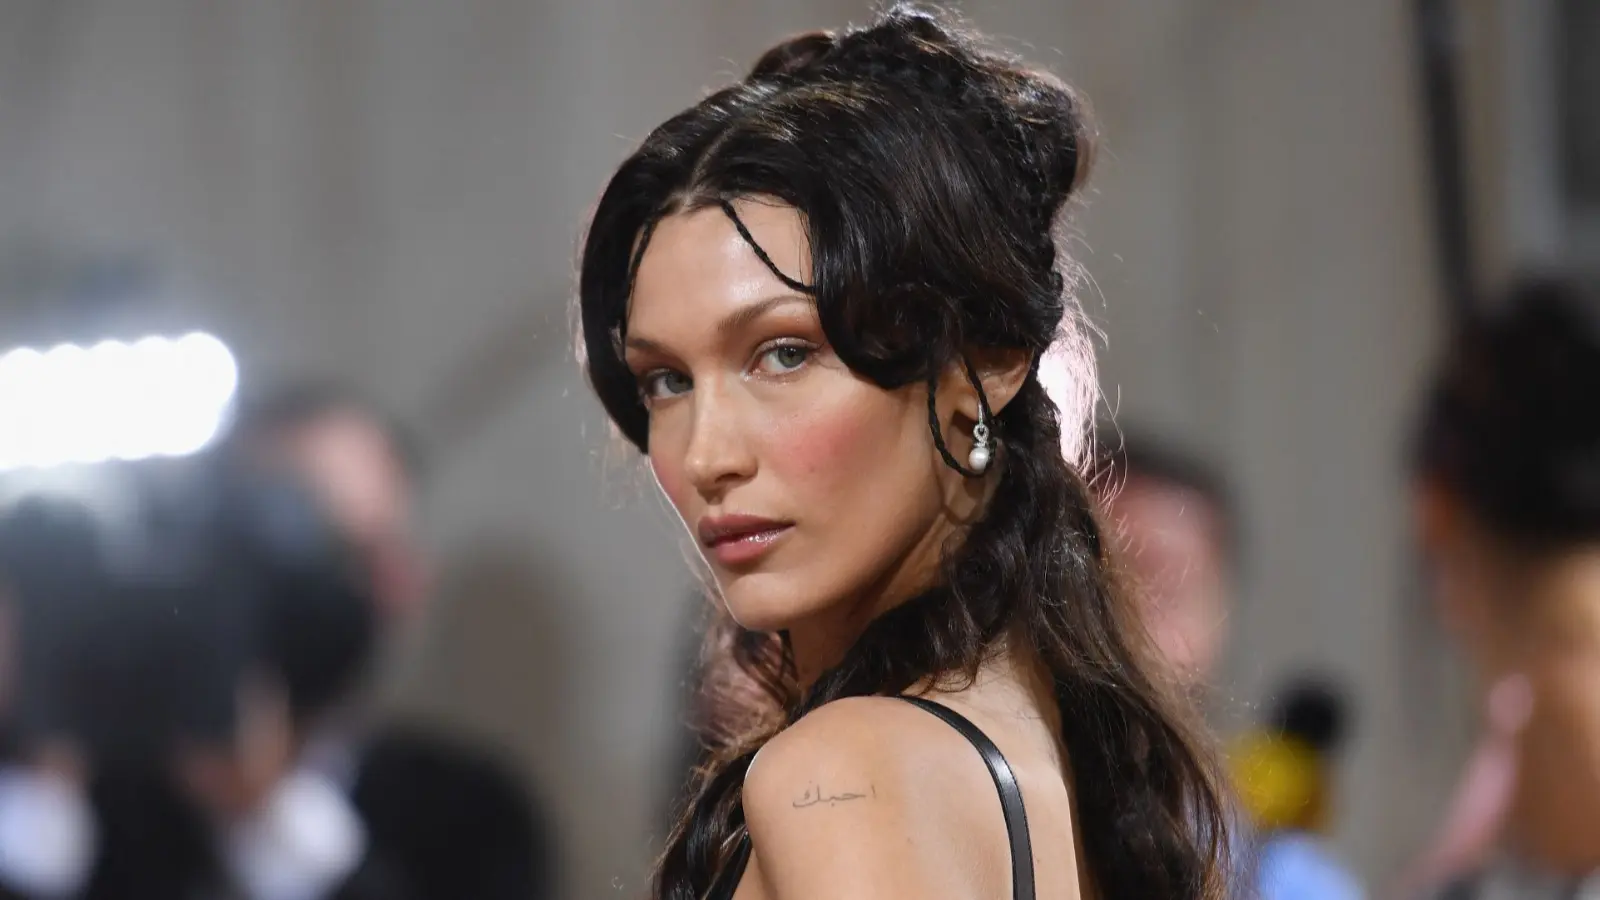 Bella Hadid Courageously Shares Her Struggle: Opens Up About 15-Year Battle With Chronic Illness And Invisible Suffering